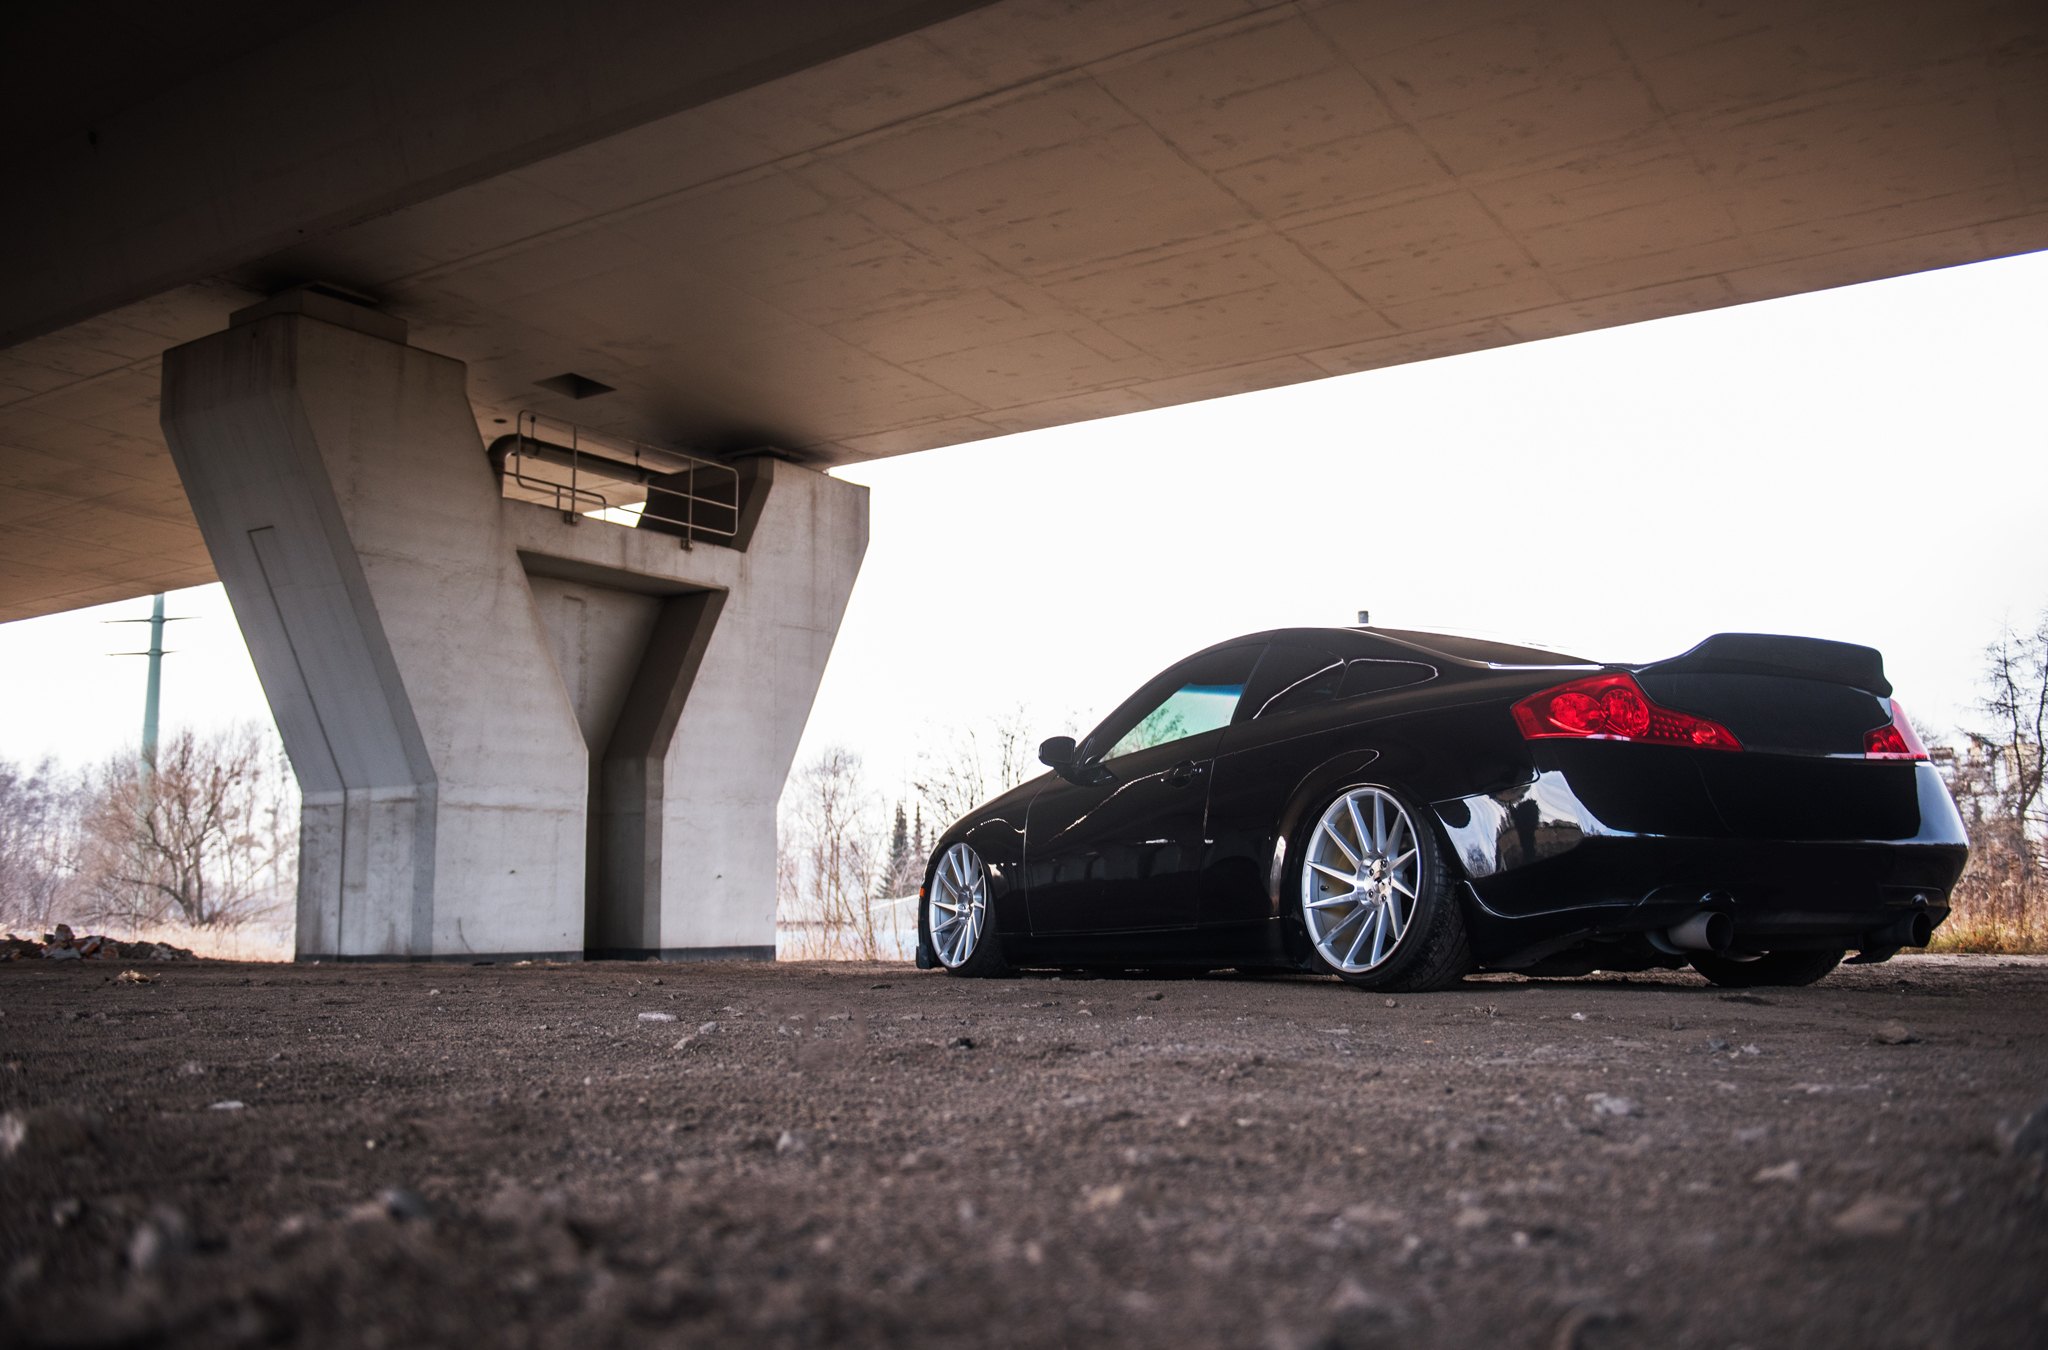 Stance is Everything: Black Infiniti G35 Built to Impress.